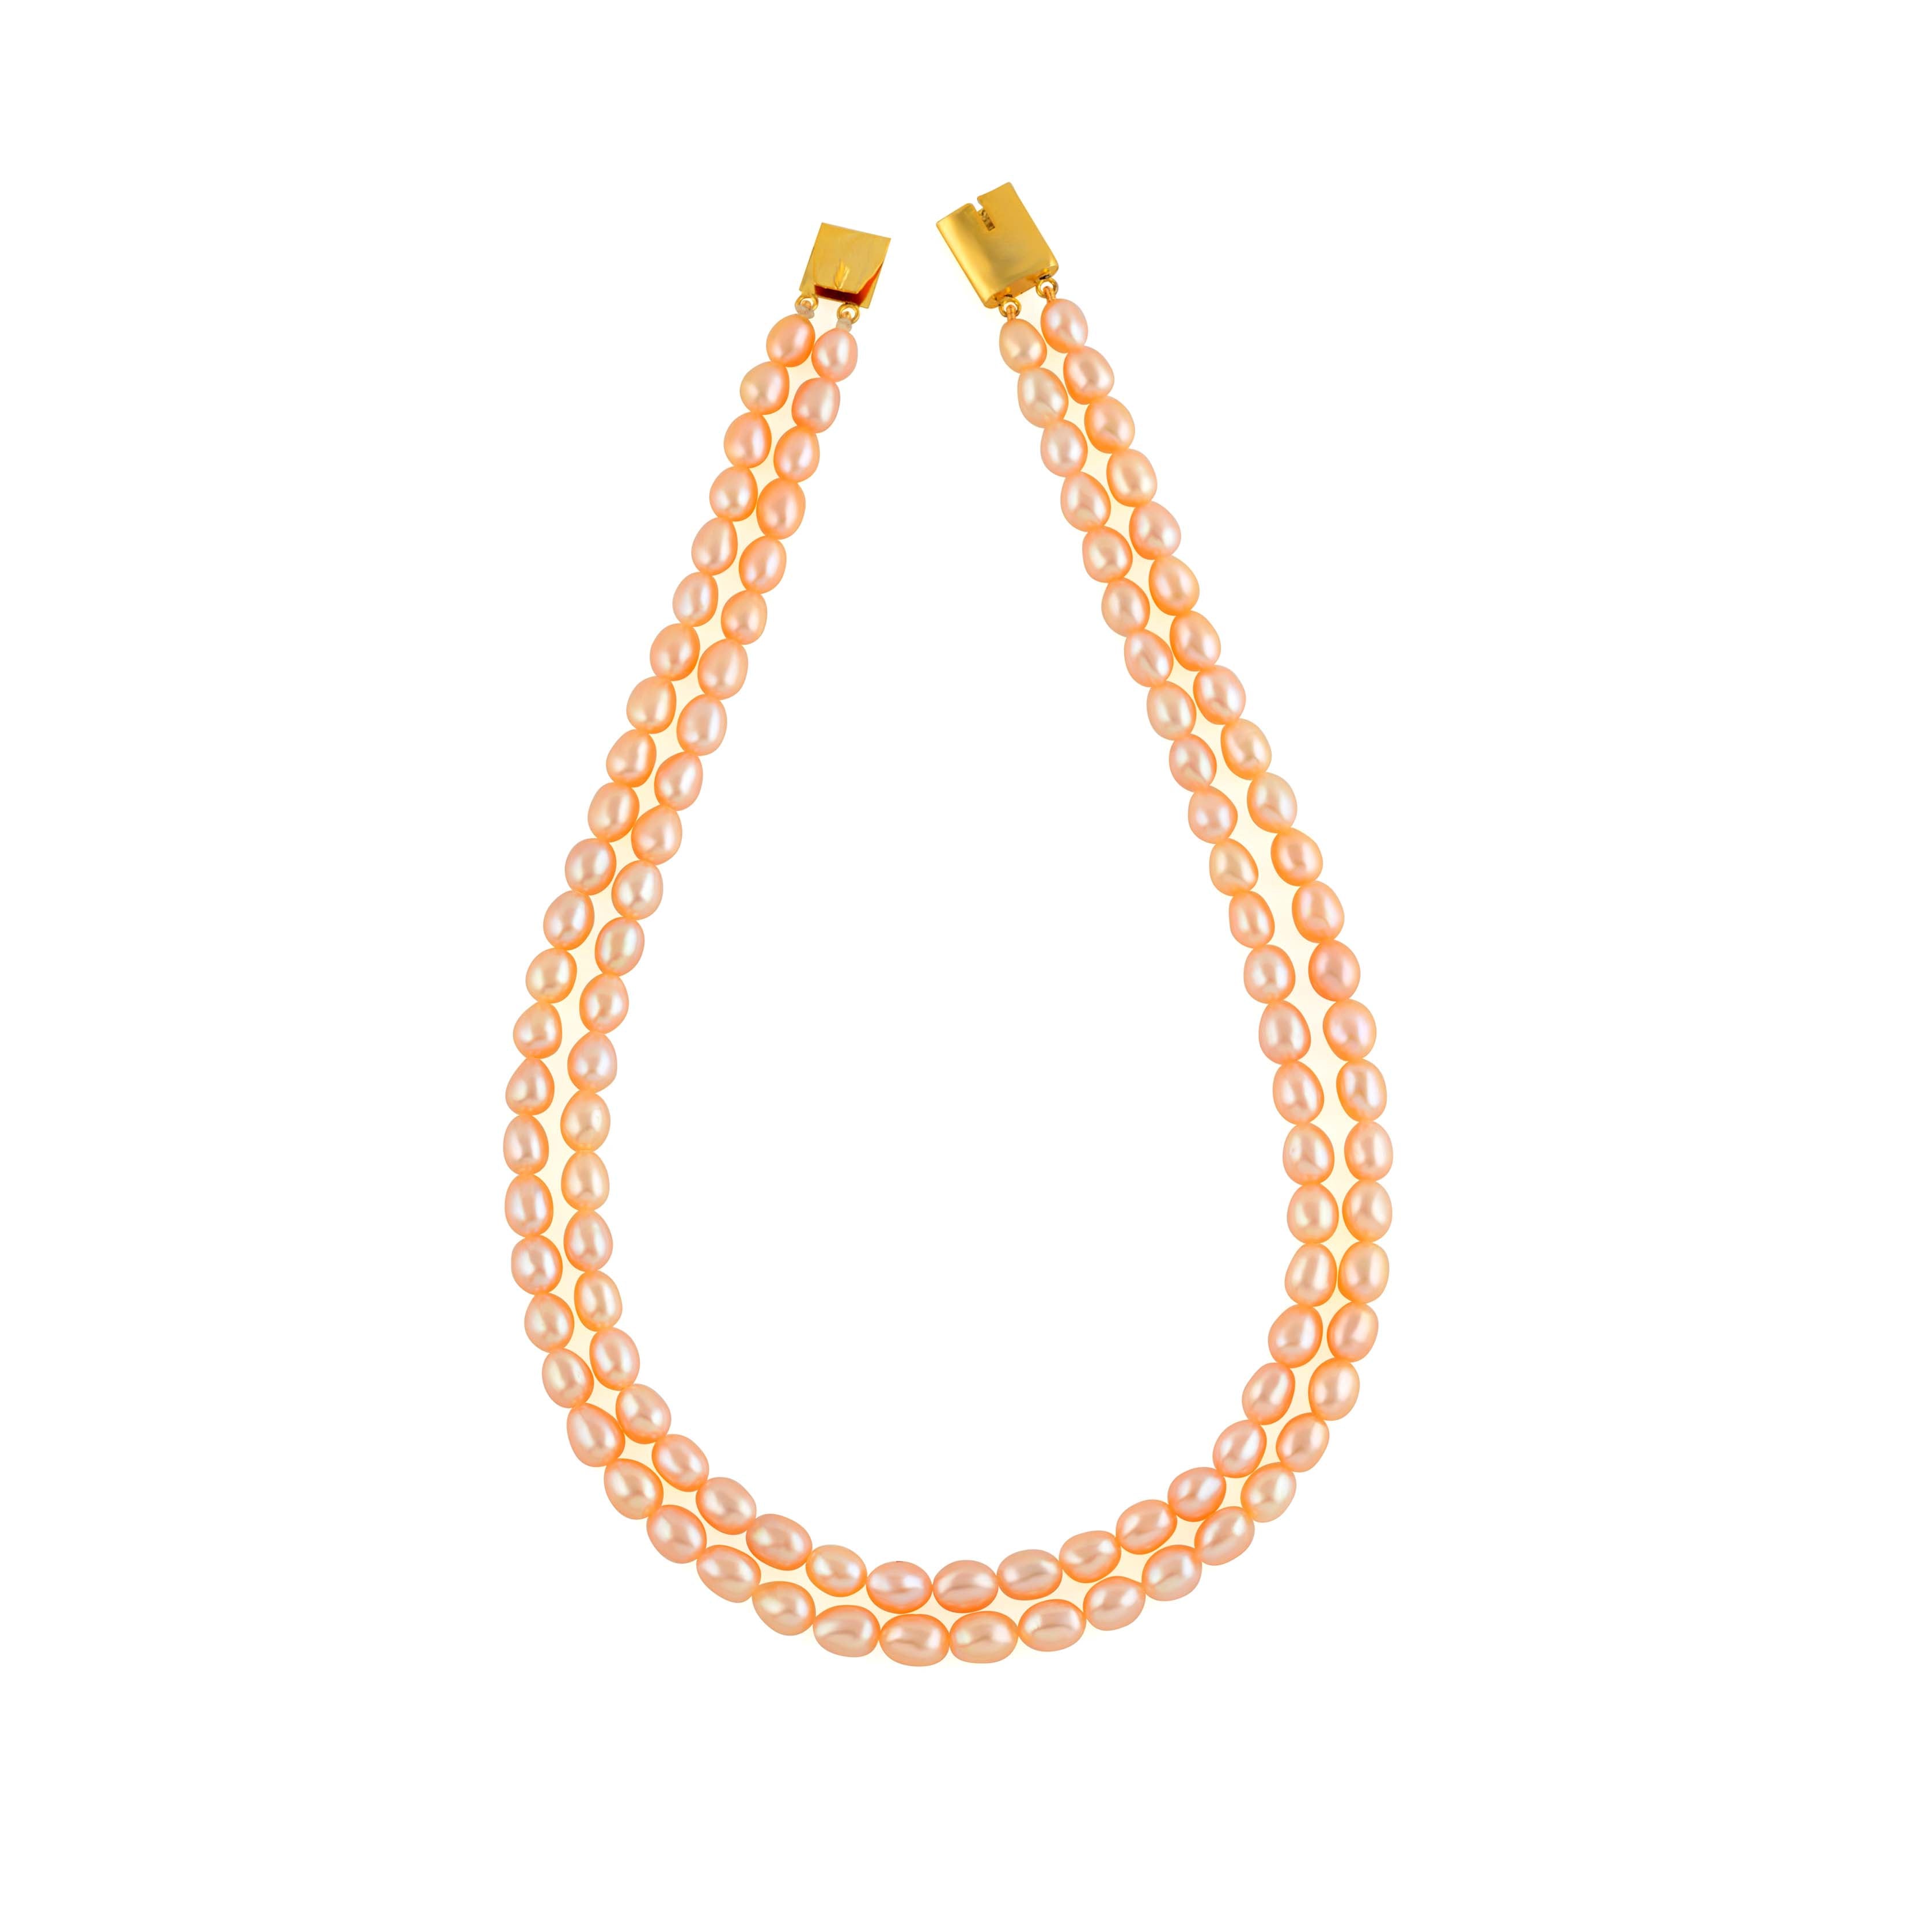 Double-strand pearl necklace in peach color - Krishna Jewellers Pearls and Gems